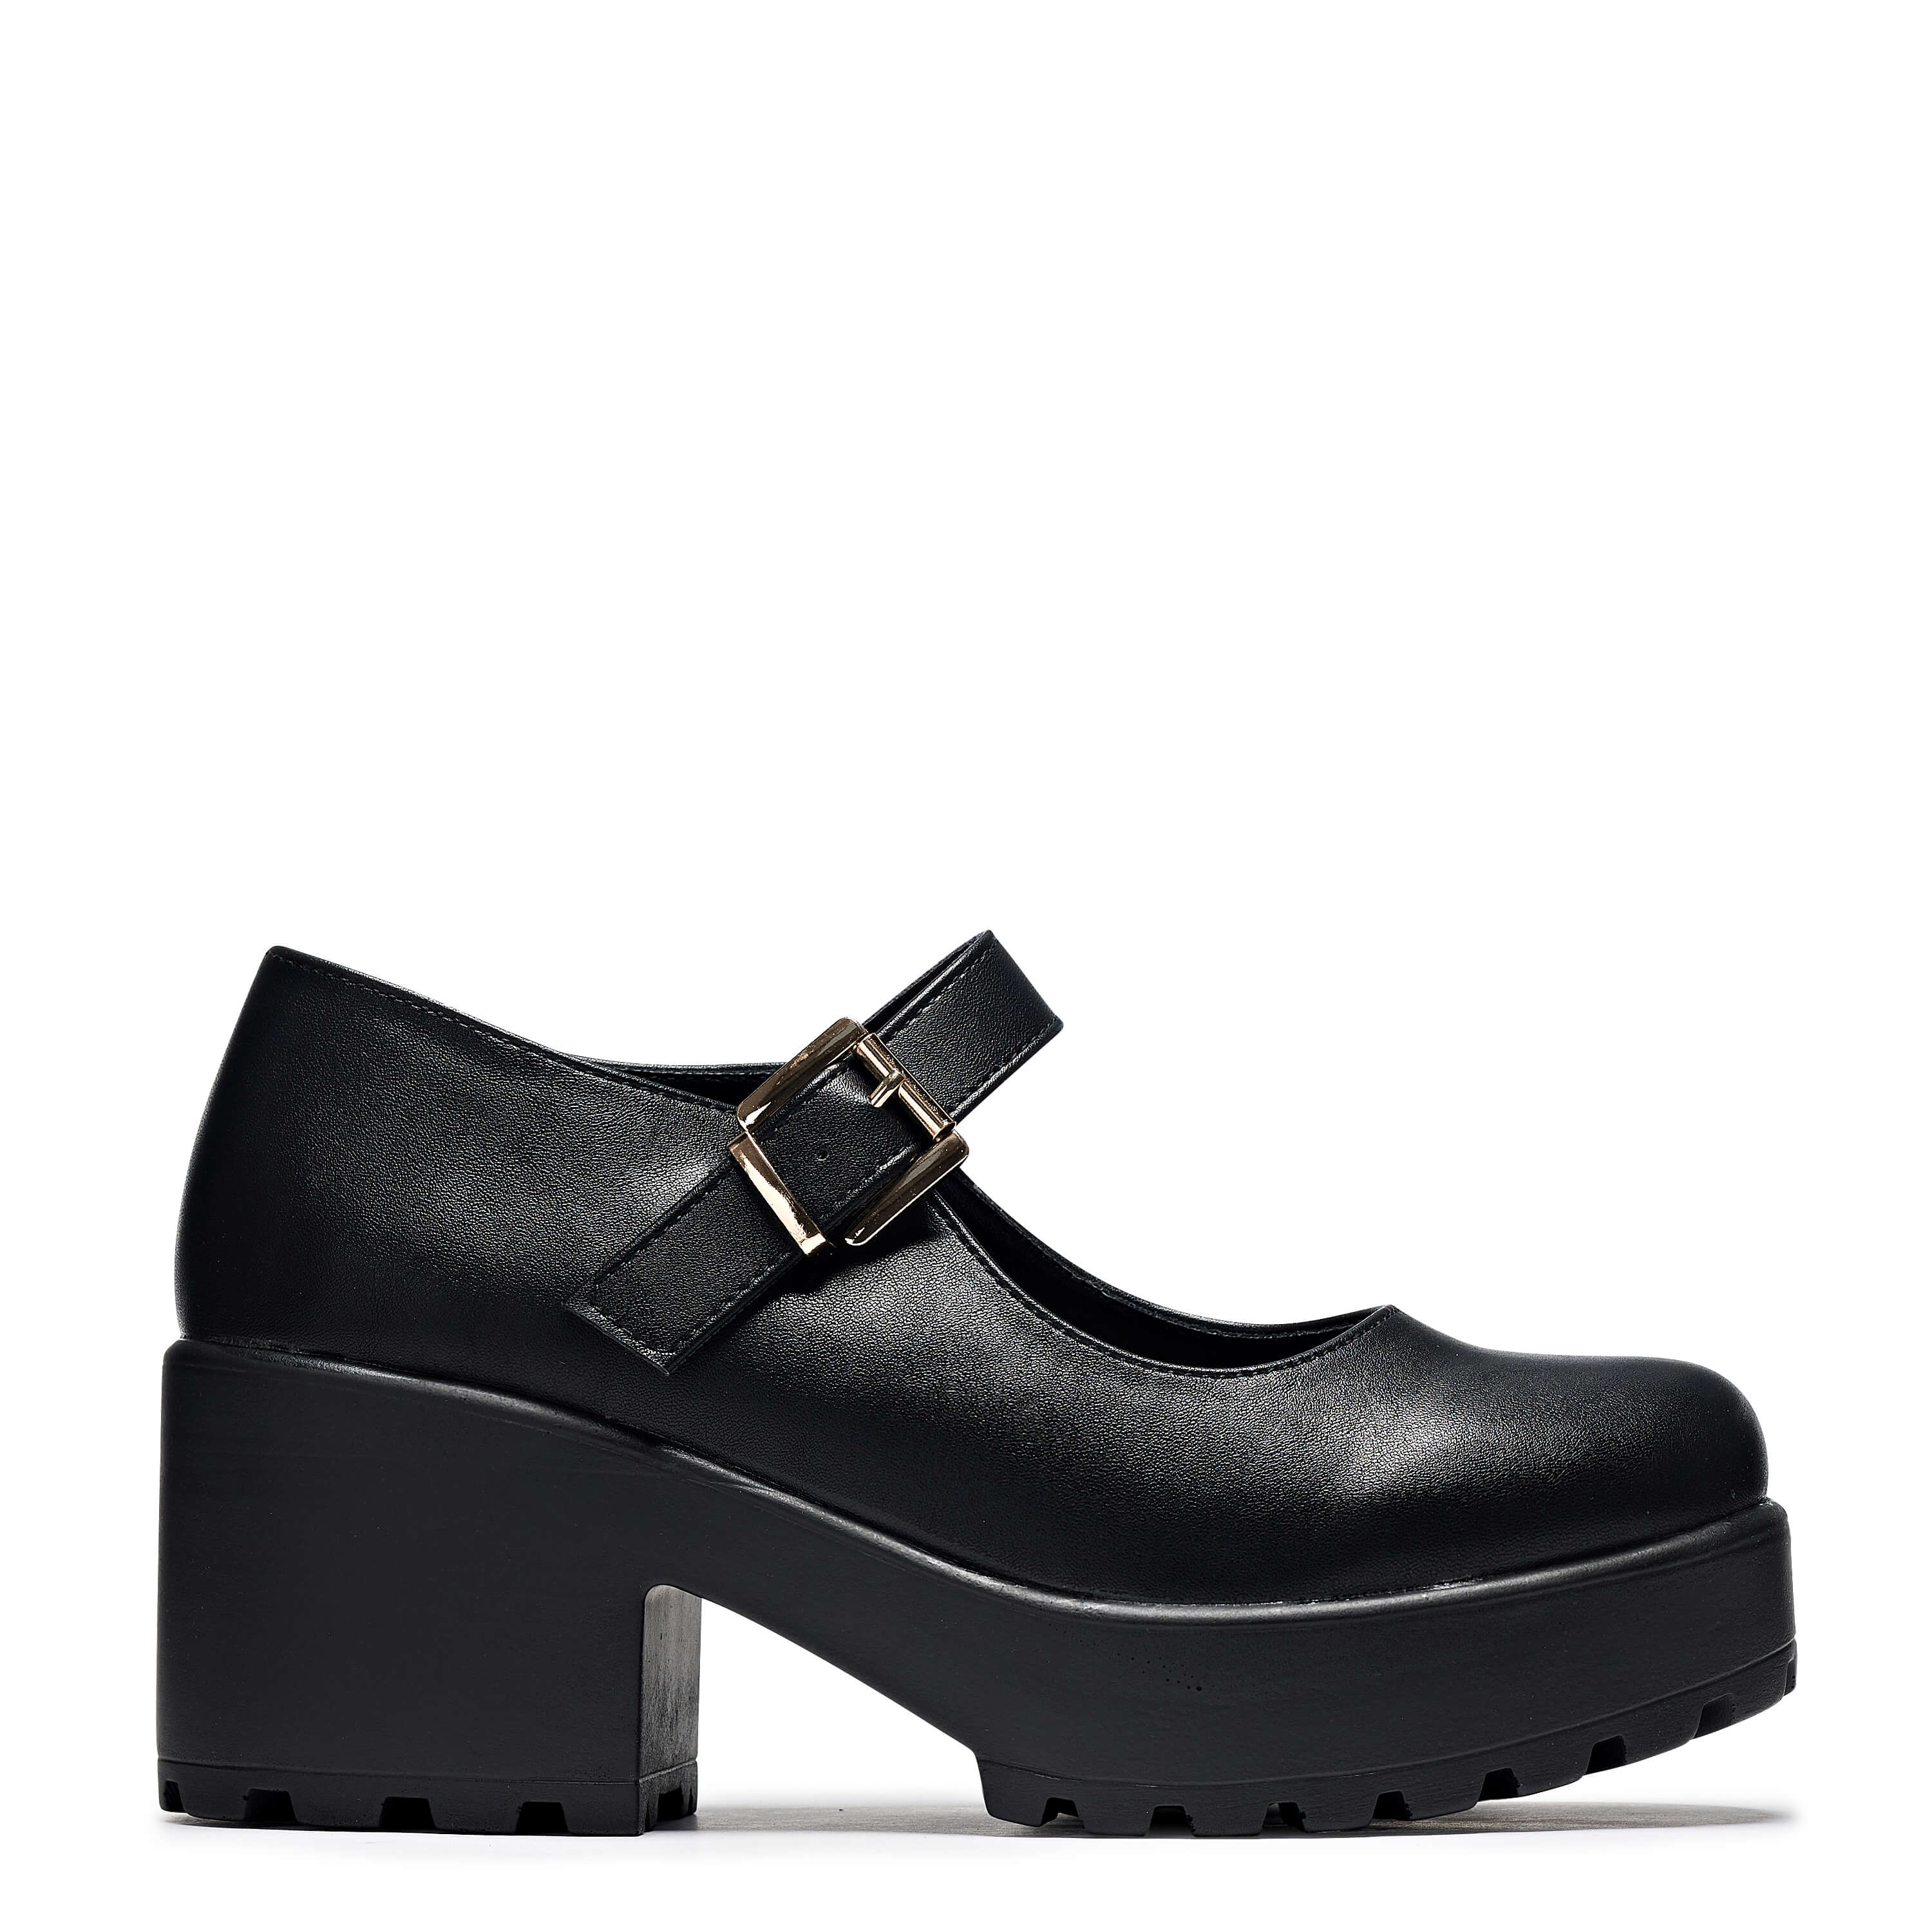 Platform Heeled Shoes Wide Fit | Simply Be